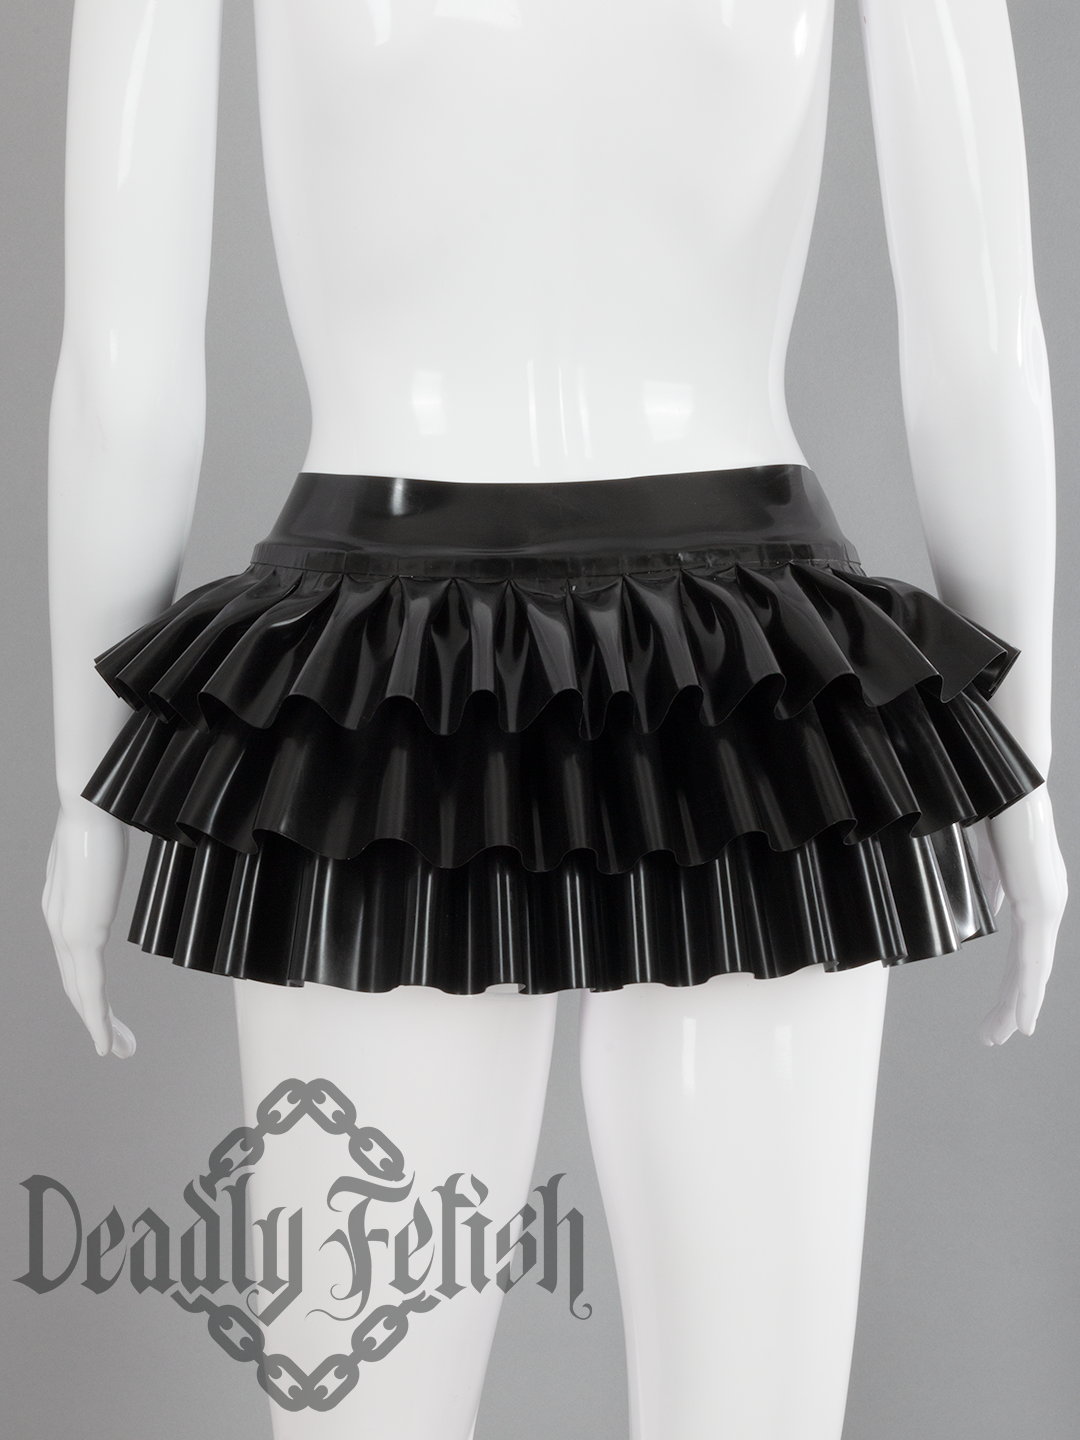 Deadly Fetish Made-To-Order Latex: Skirt #15